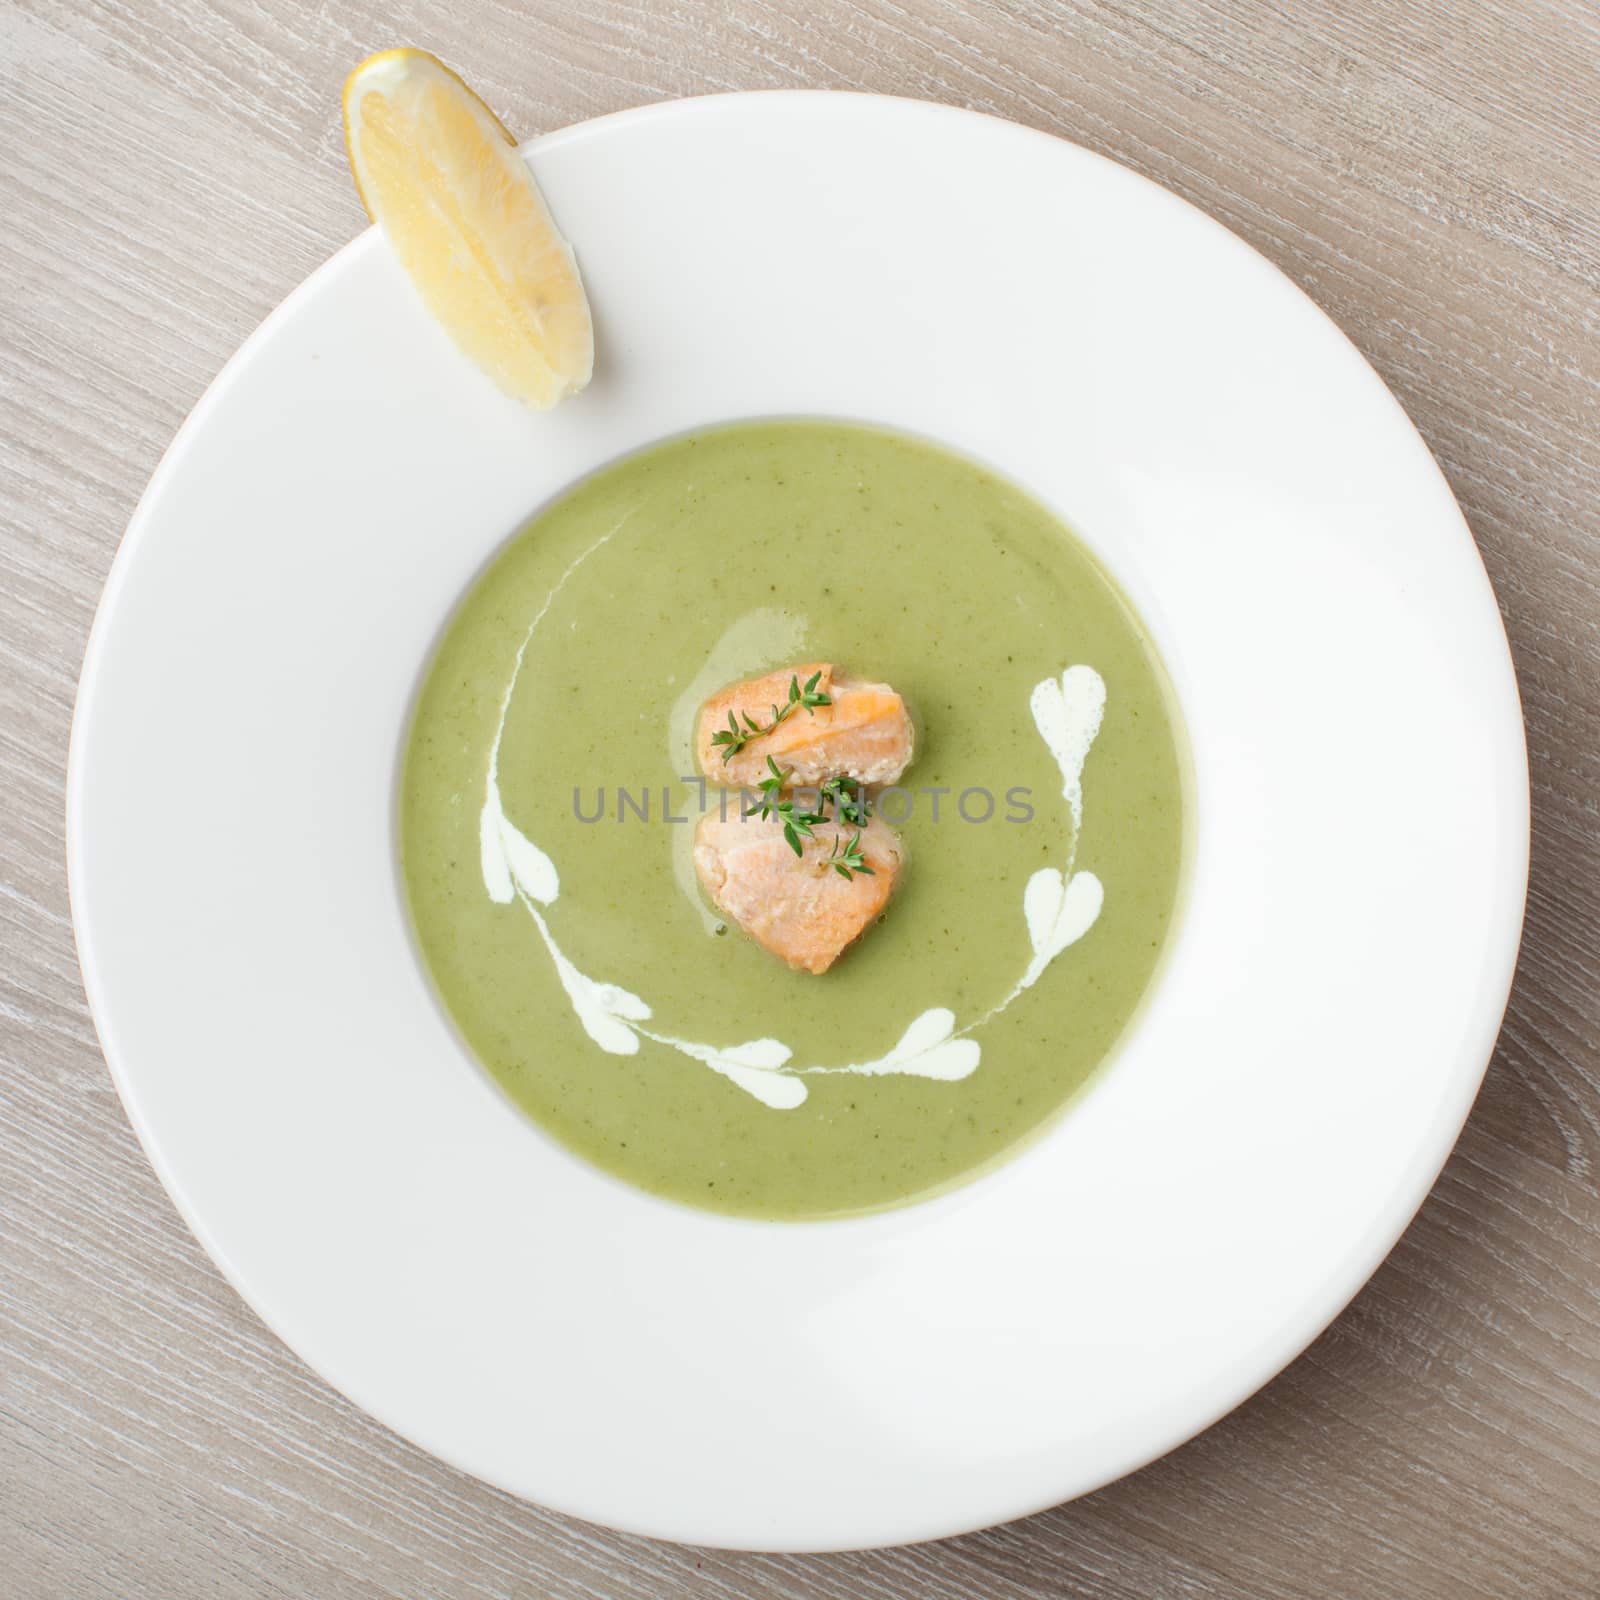 Green cabbage broccoli cream soup puree in white plate  served with  filleted salmon pieces , lemon and  theme